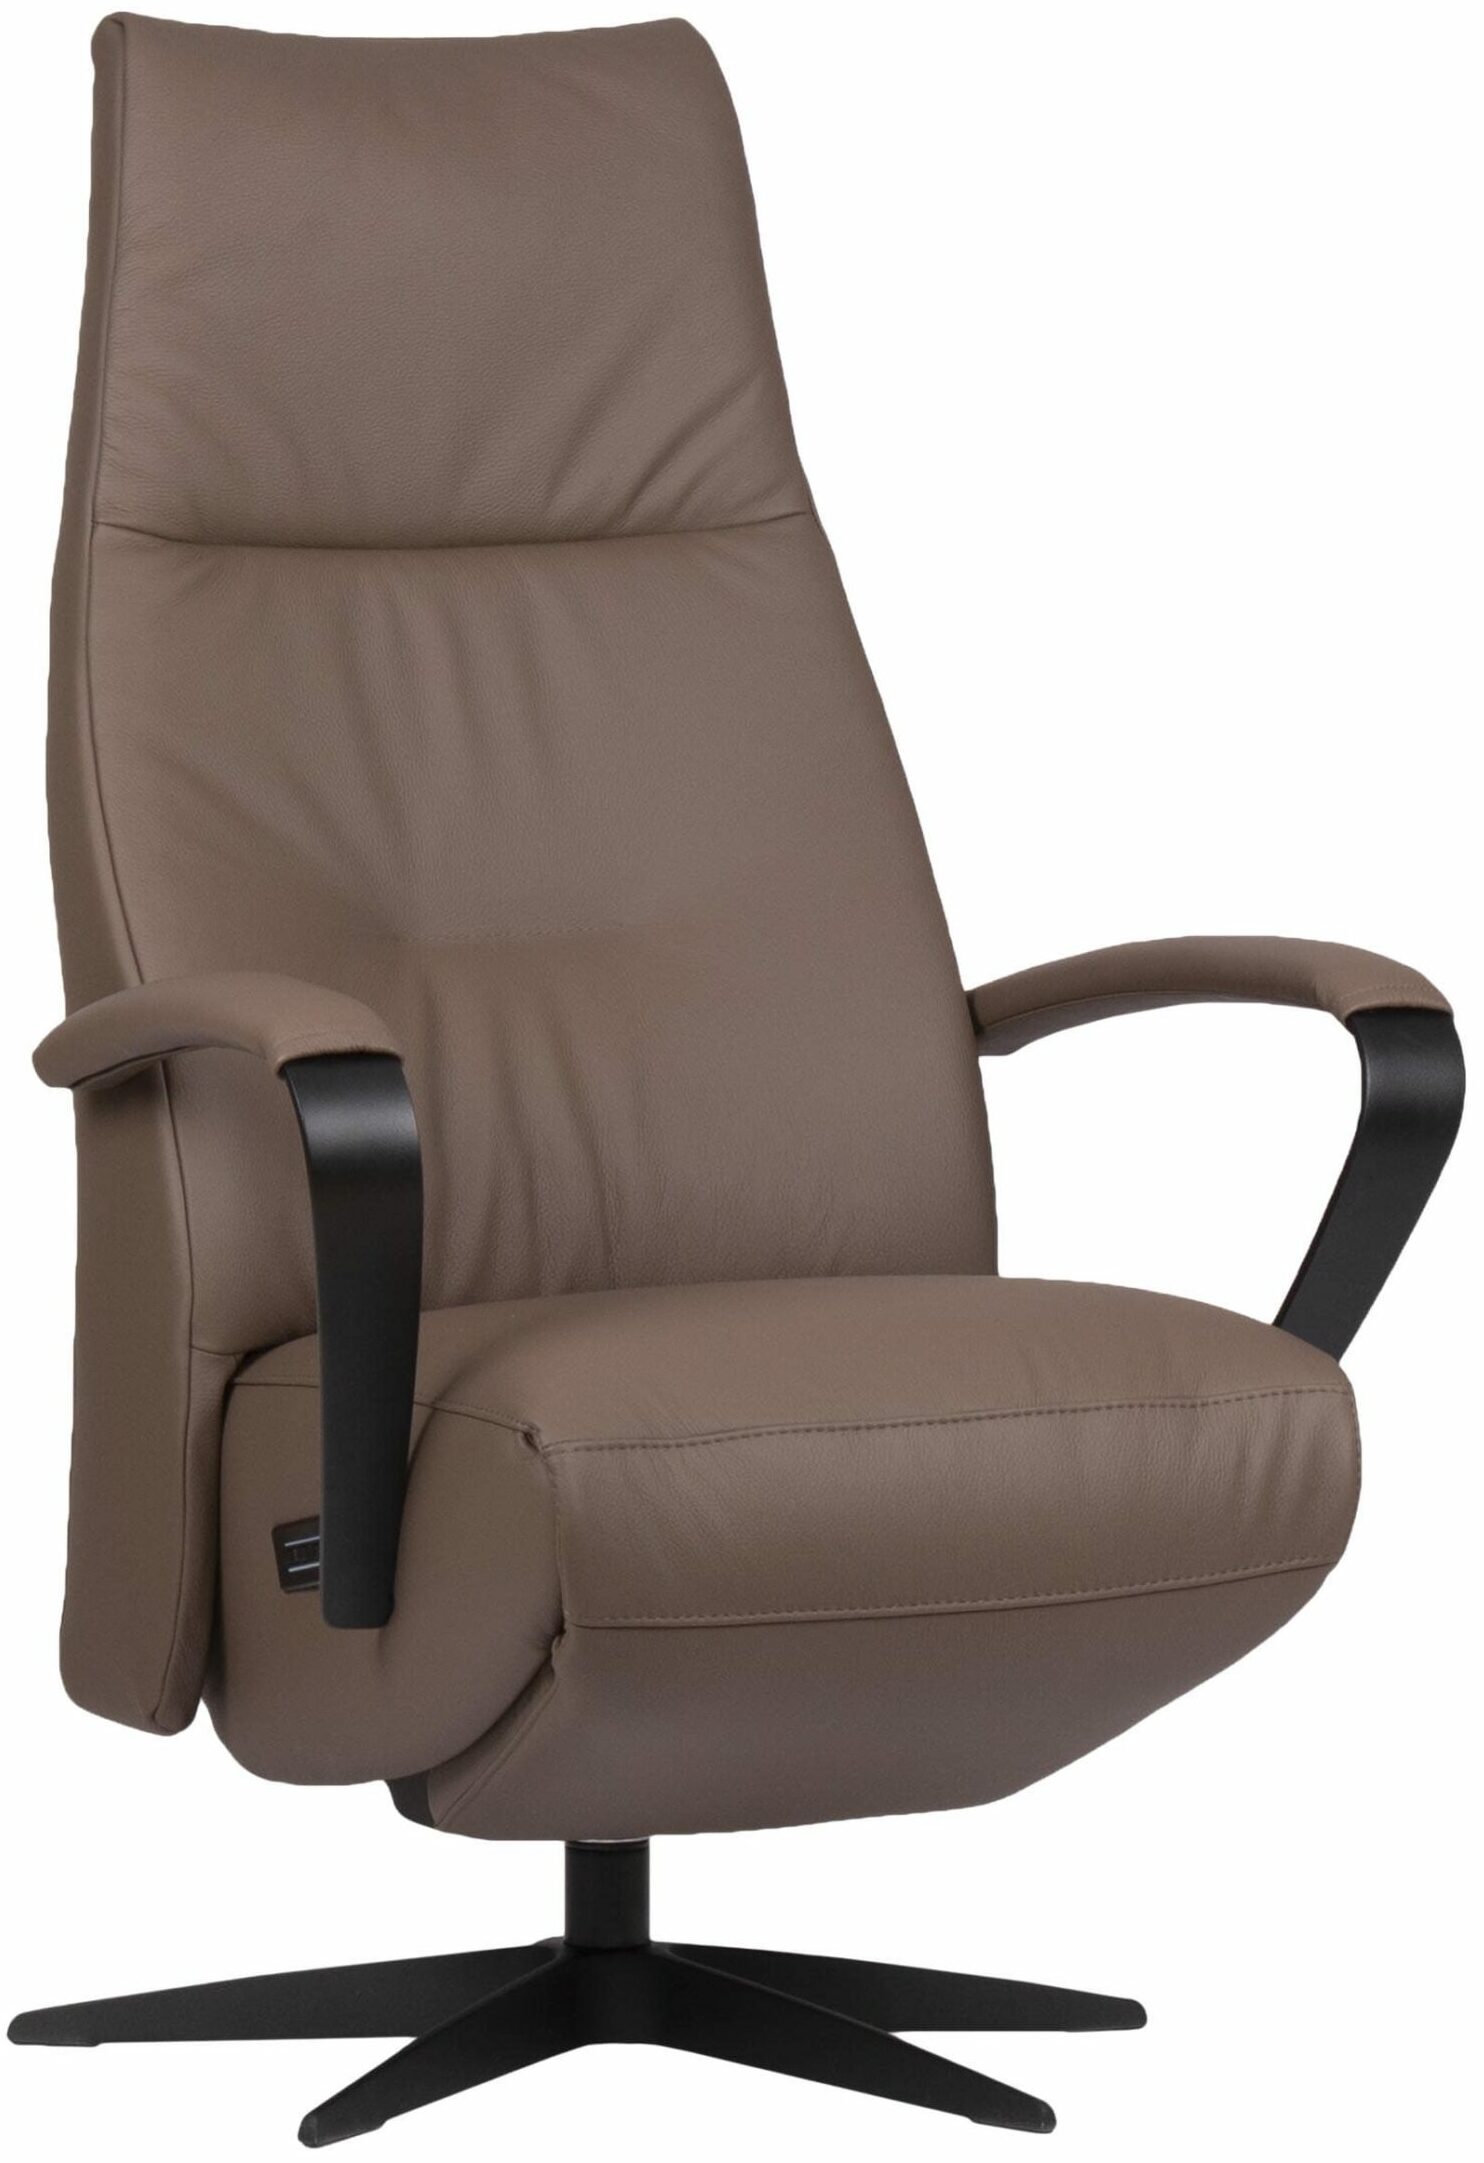 Twinz 626 relaxfauteuil